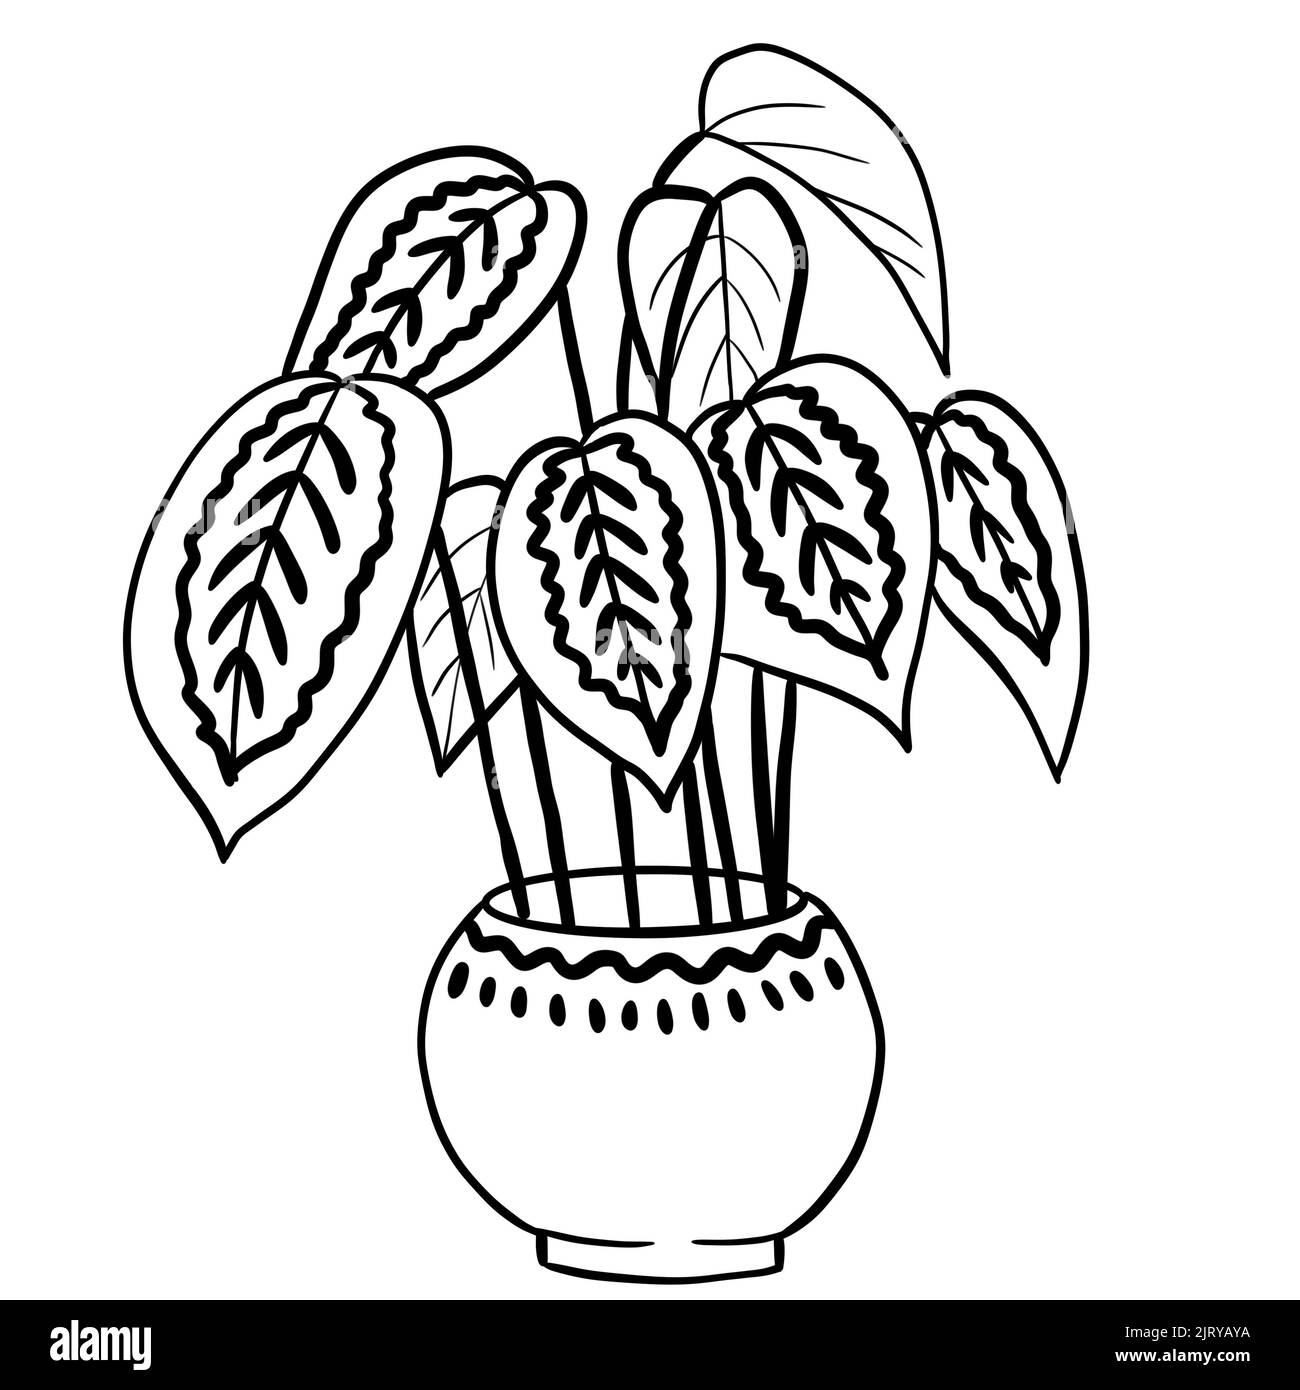 Calathea marantha in a pot in black line outline cartoon style. Coloring book houseplants flowers plant for interrior design in simple minimalist design, plant lady gift Stock Photo